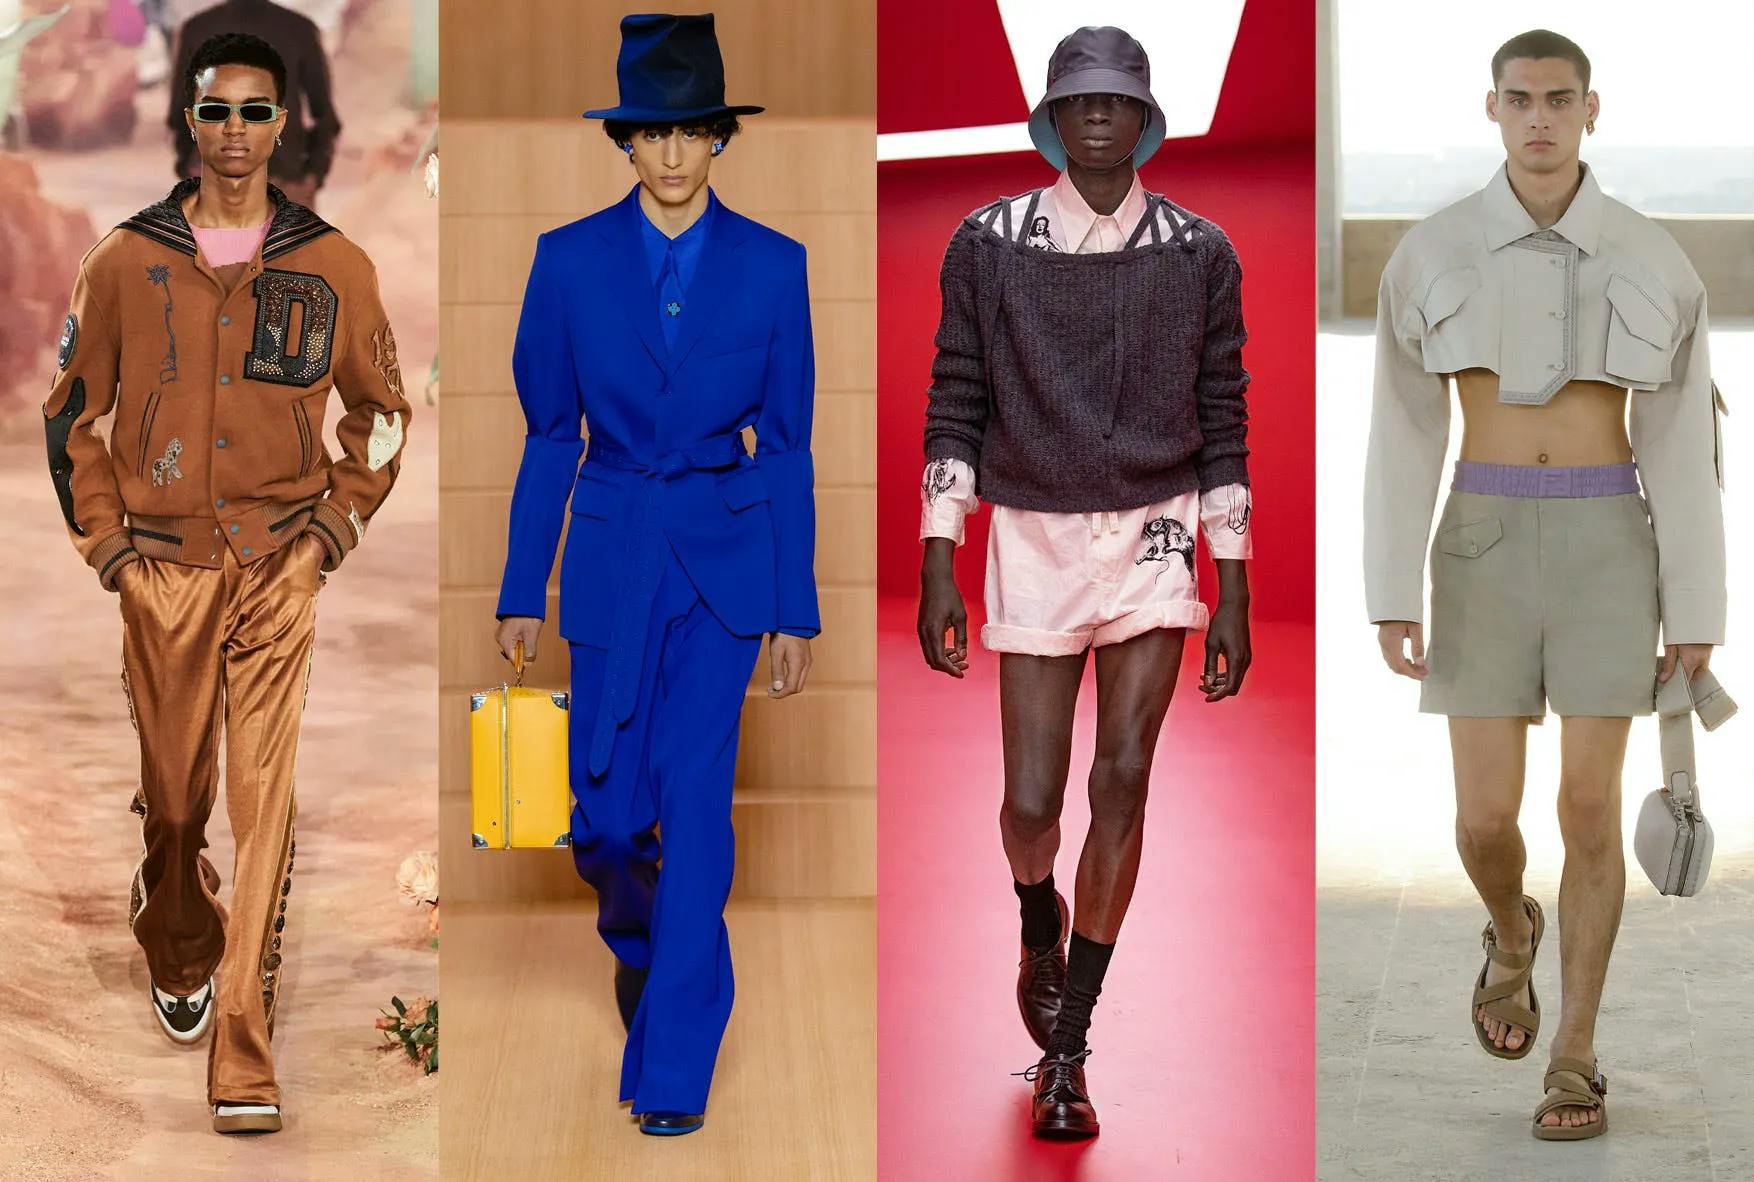 The Biggest Fashion Trends Of 2022 